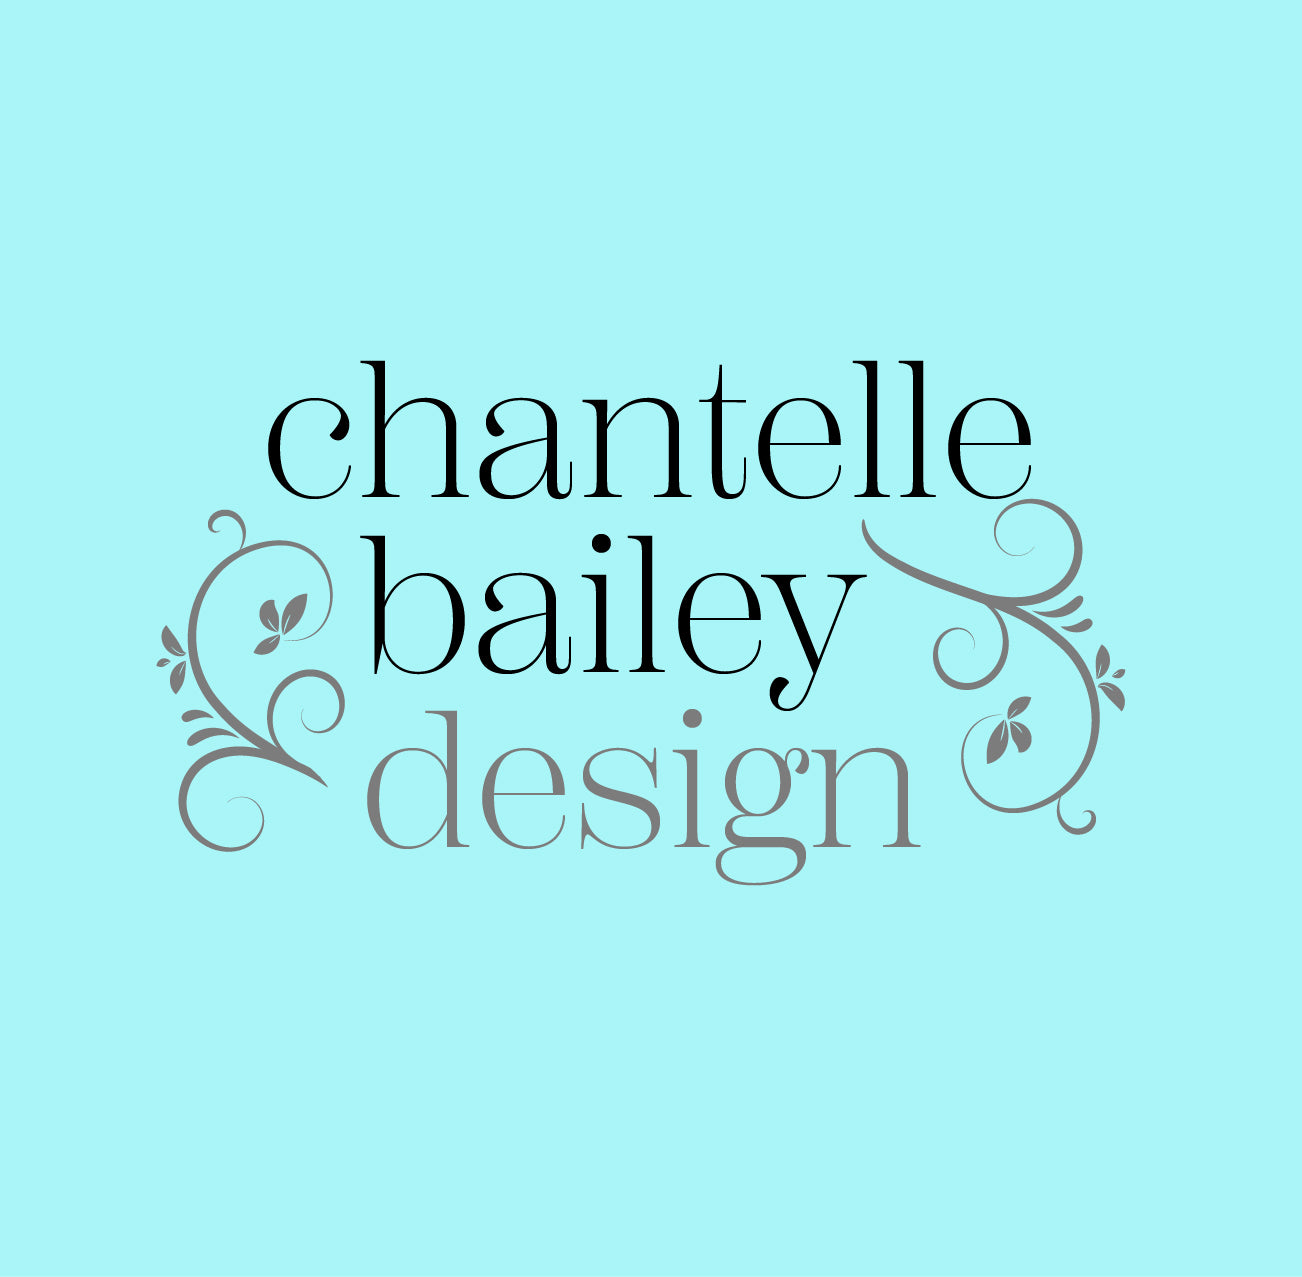 Designs by Chantelle Bailey